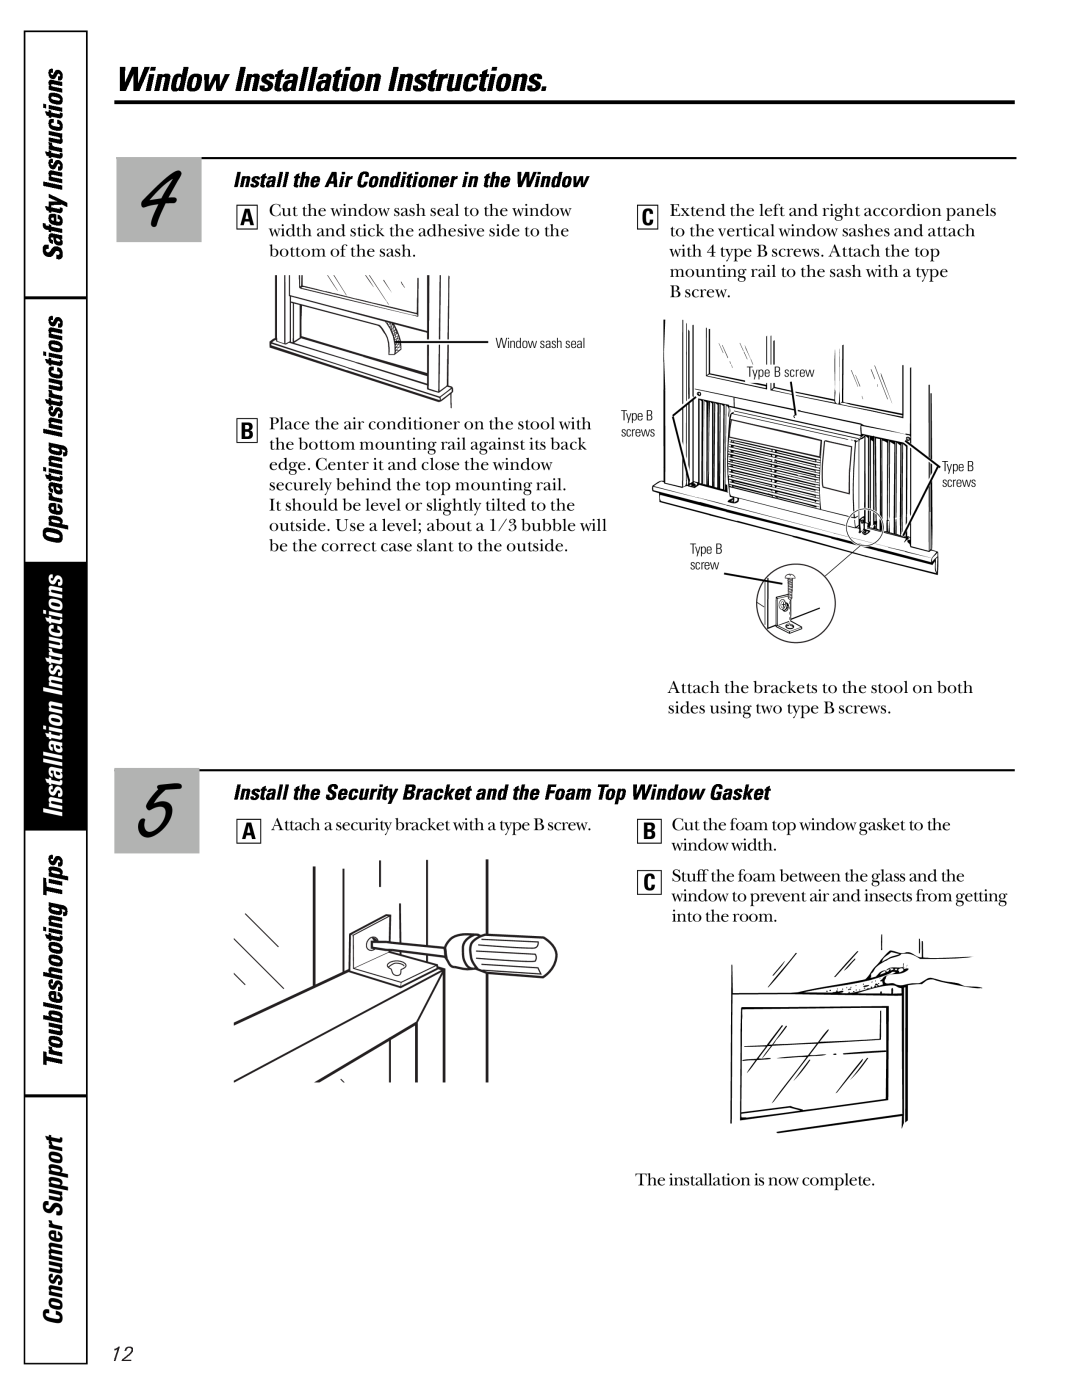 GE AST06, ASV05, AST05 Install the Air Conditioner in the Window, Window Installation Instructions, Safety 